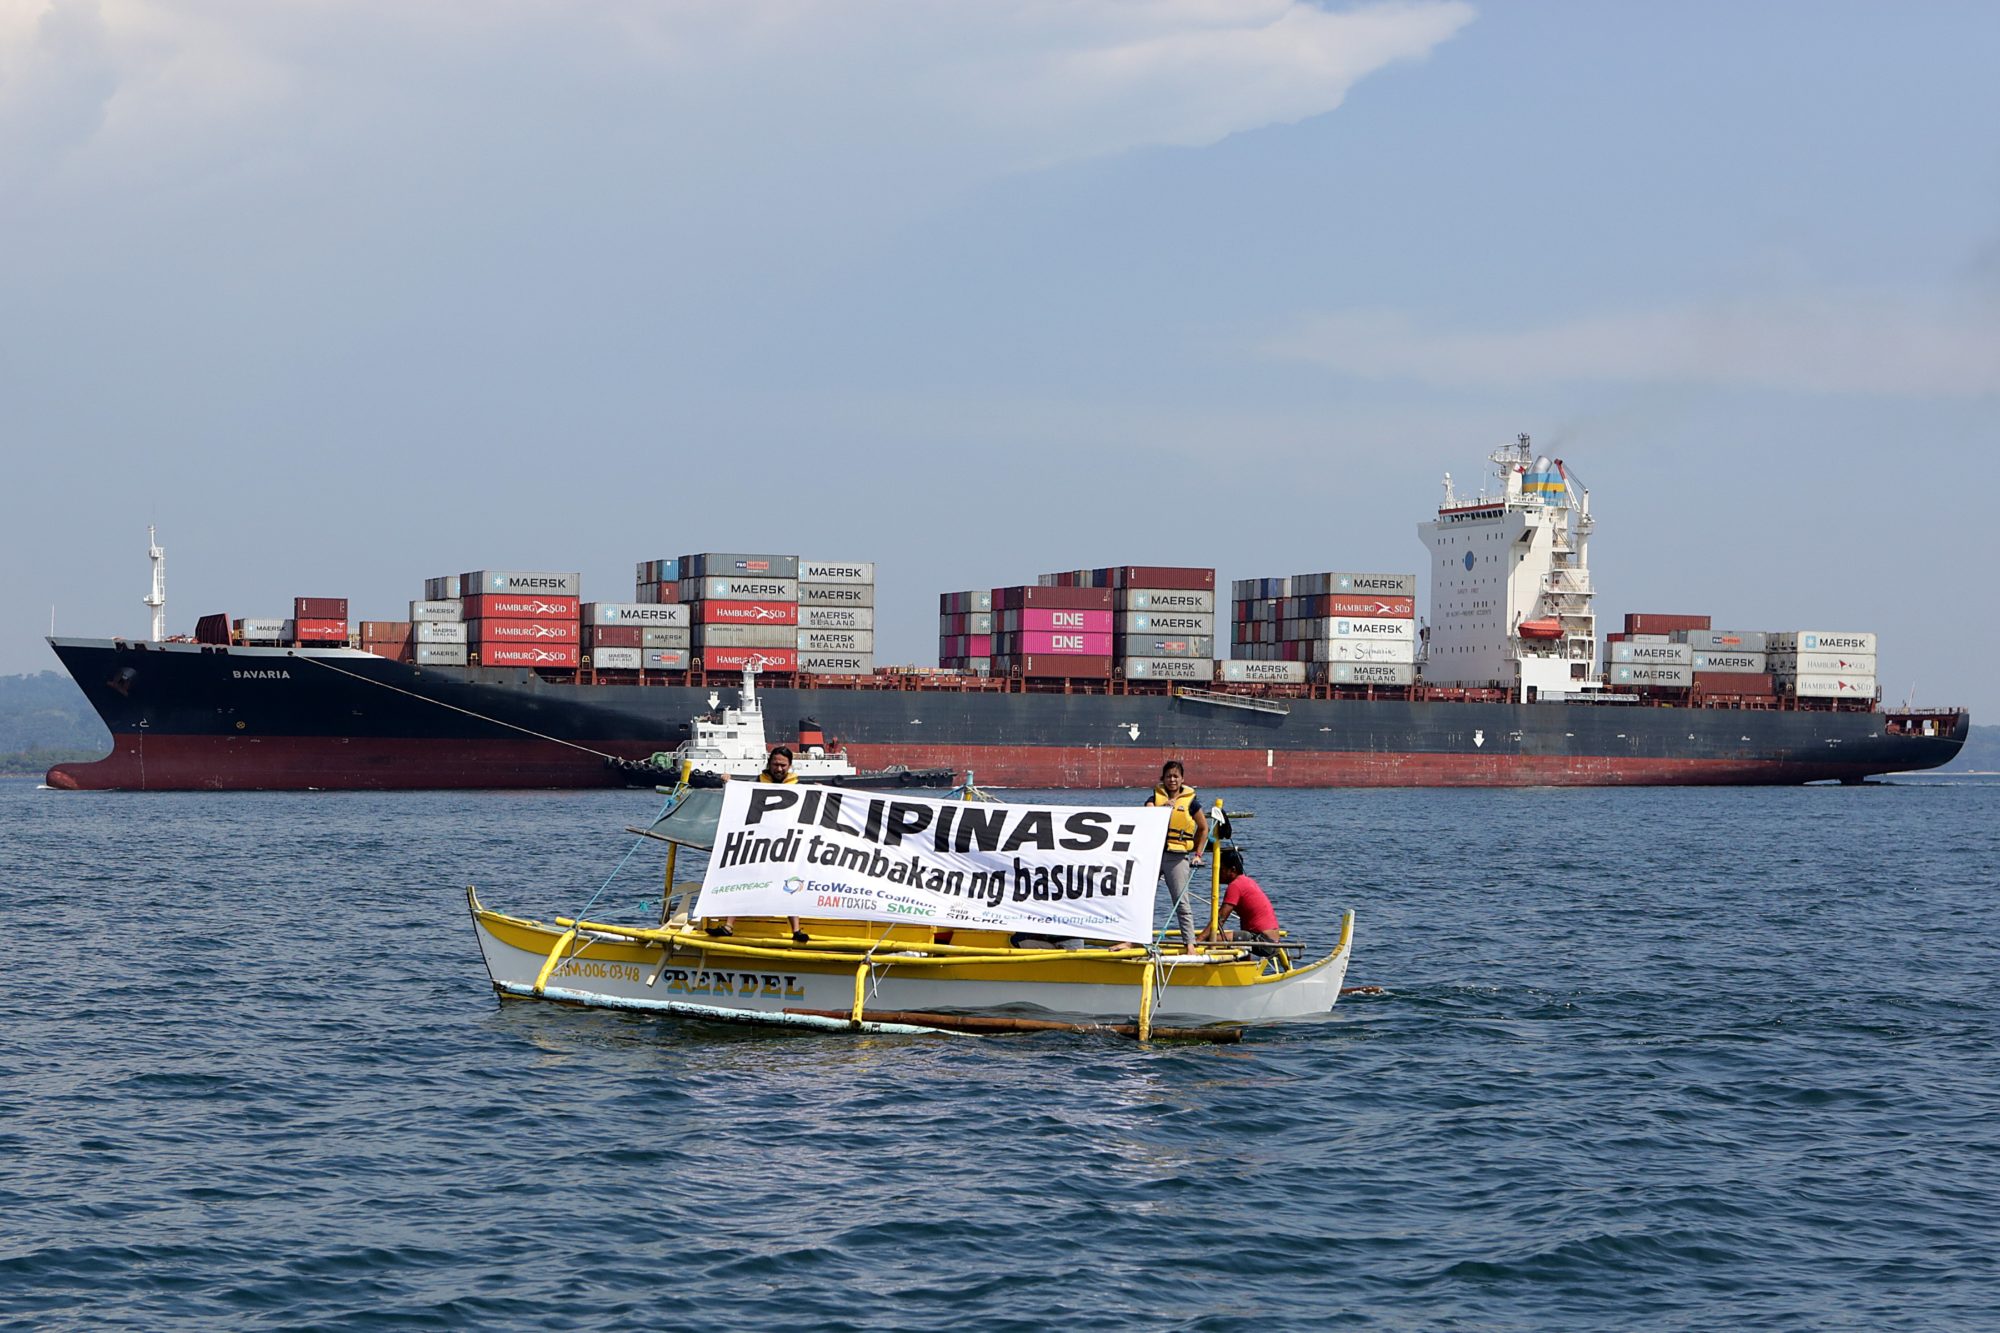 Philippines ships. Trash ship. Ship back. Philippine Ports and shipping.